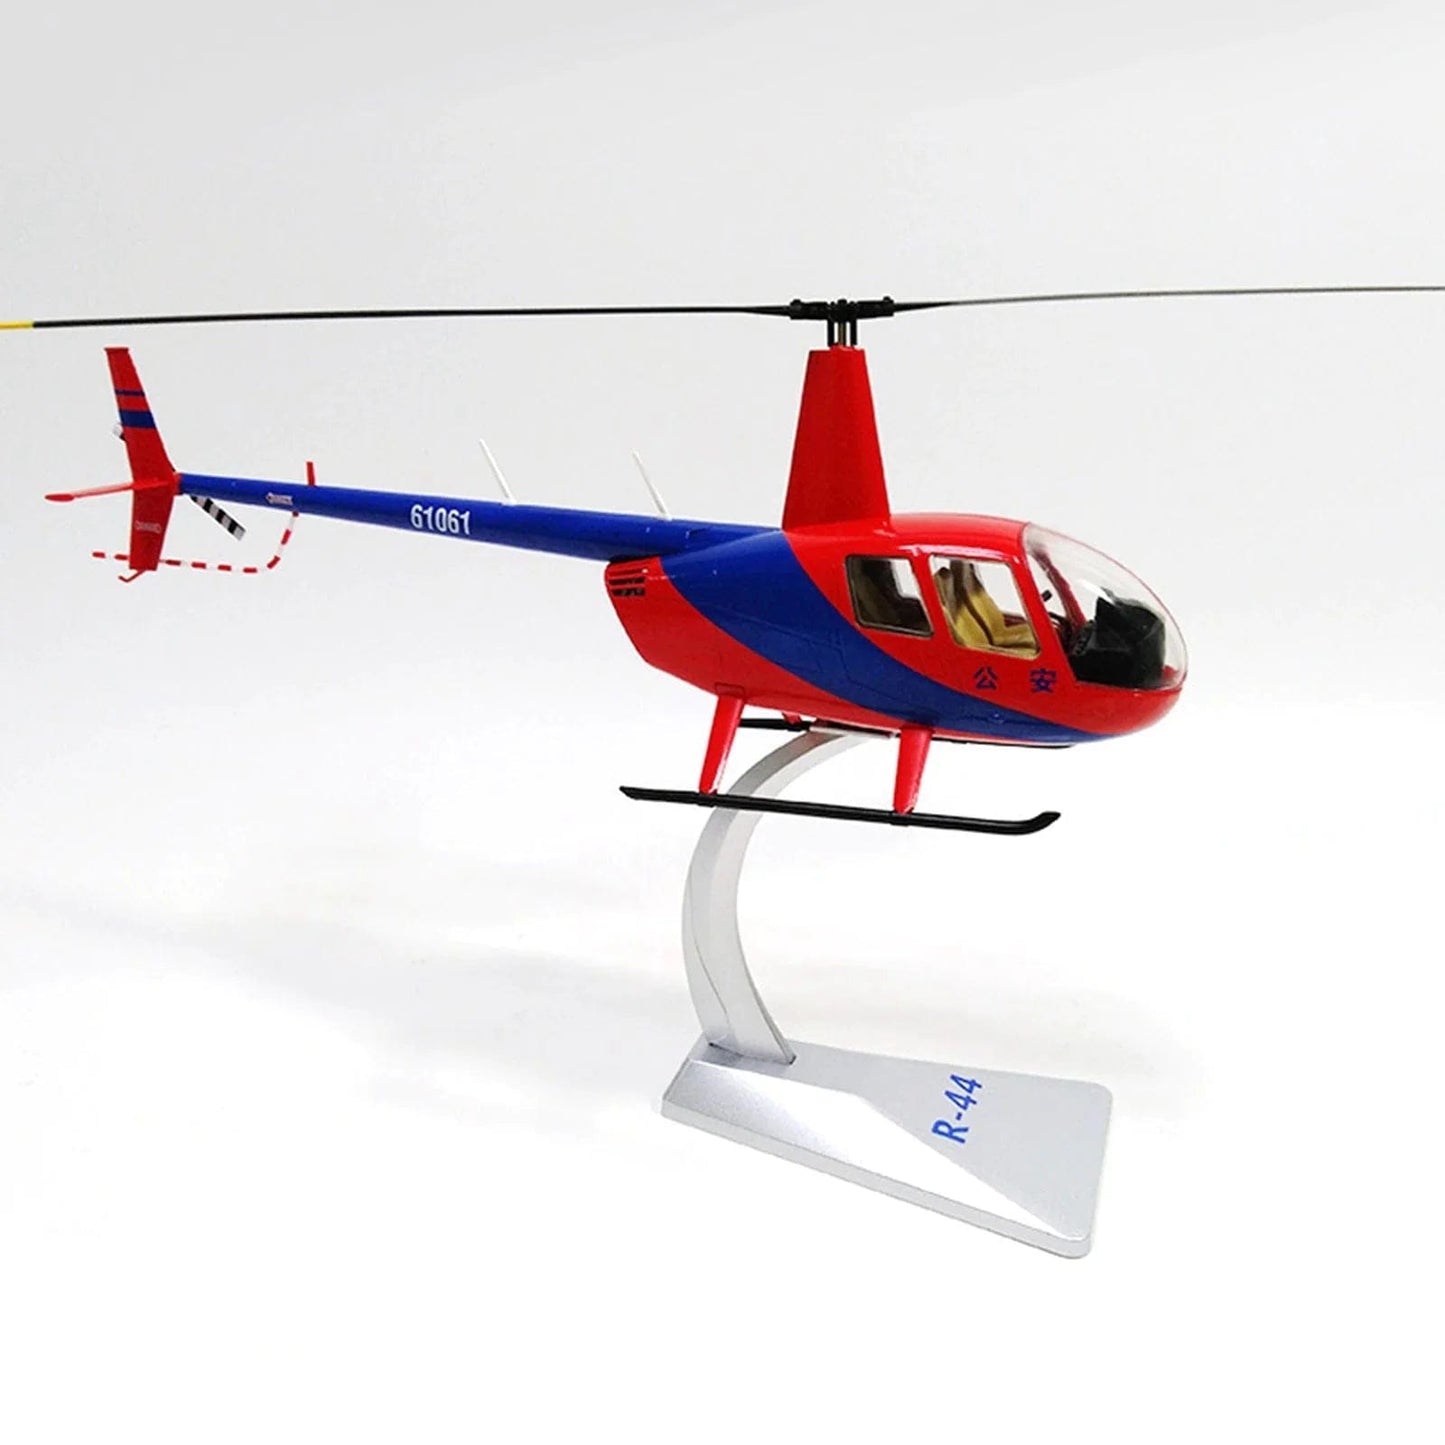 ALDO Creative Arts Collectibles Scale Model 18.89x16.33x10.23inch / NEW / Diecast metal Robinson R44 Helicopter Deck Top Diecast Metal Model Aircraft